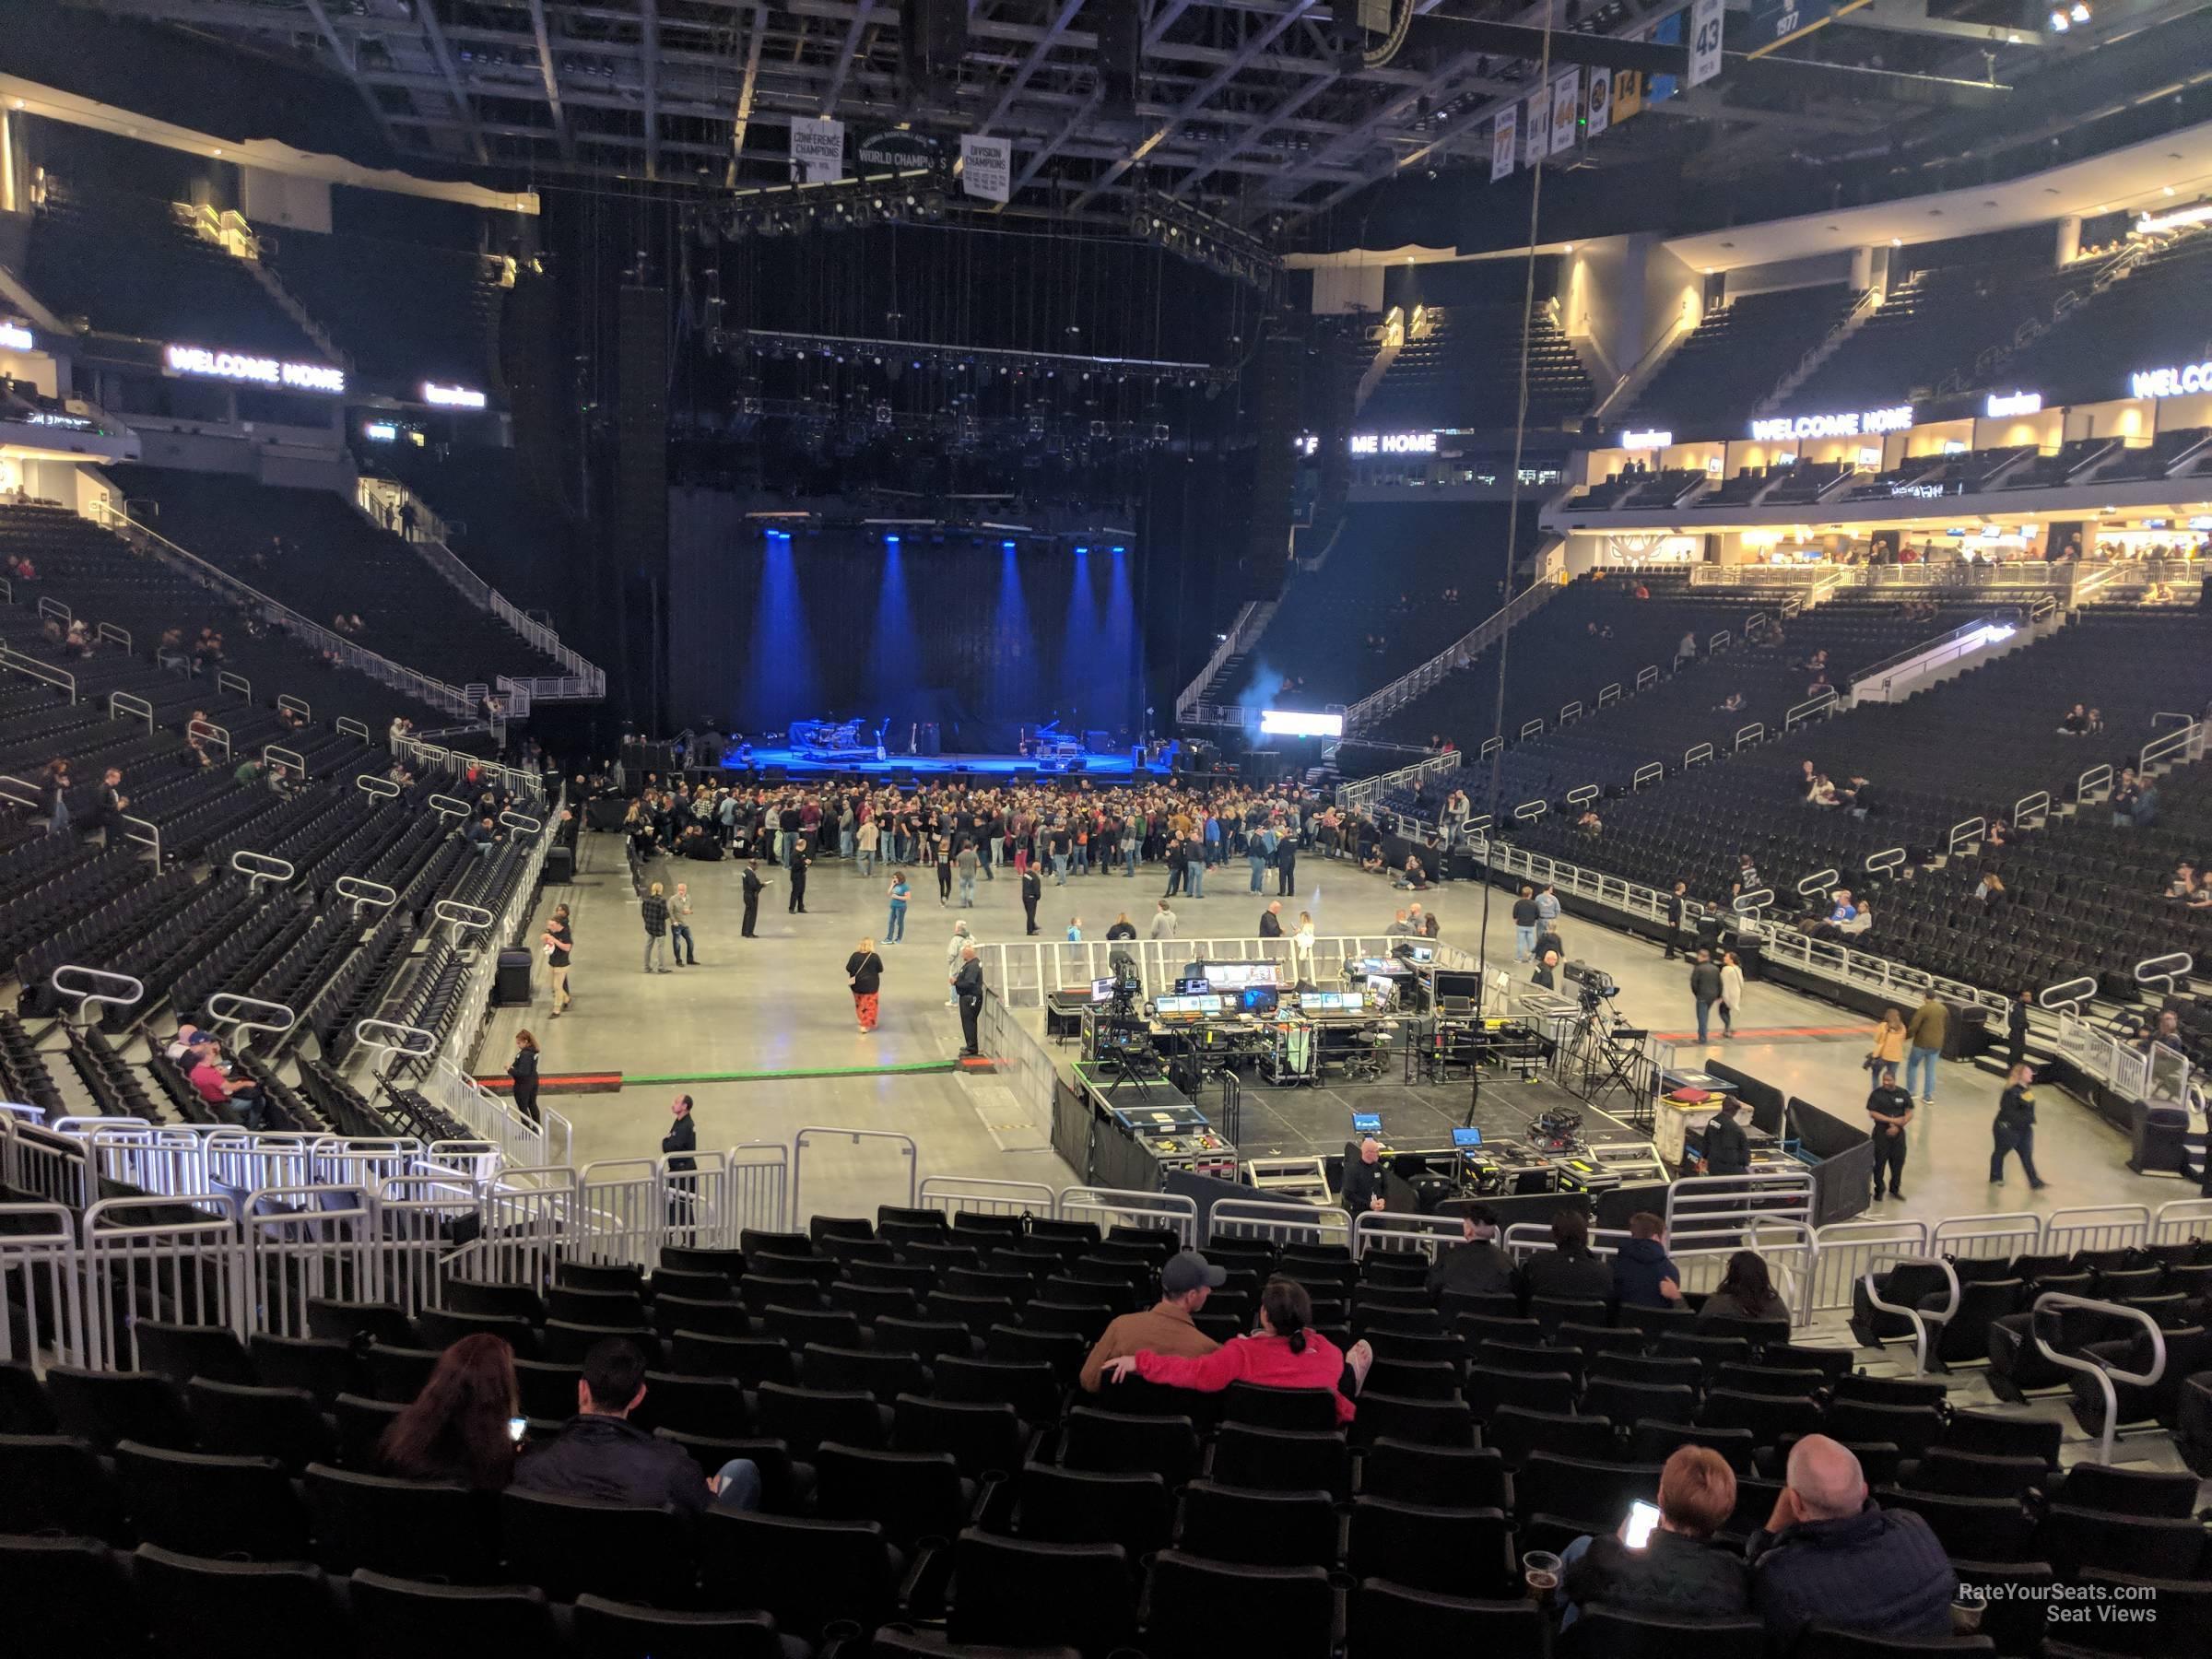 head-on concert view at Fiserv Forum